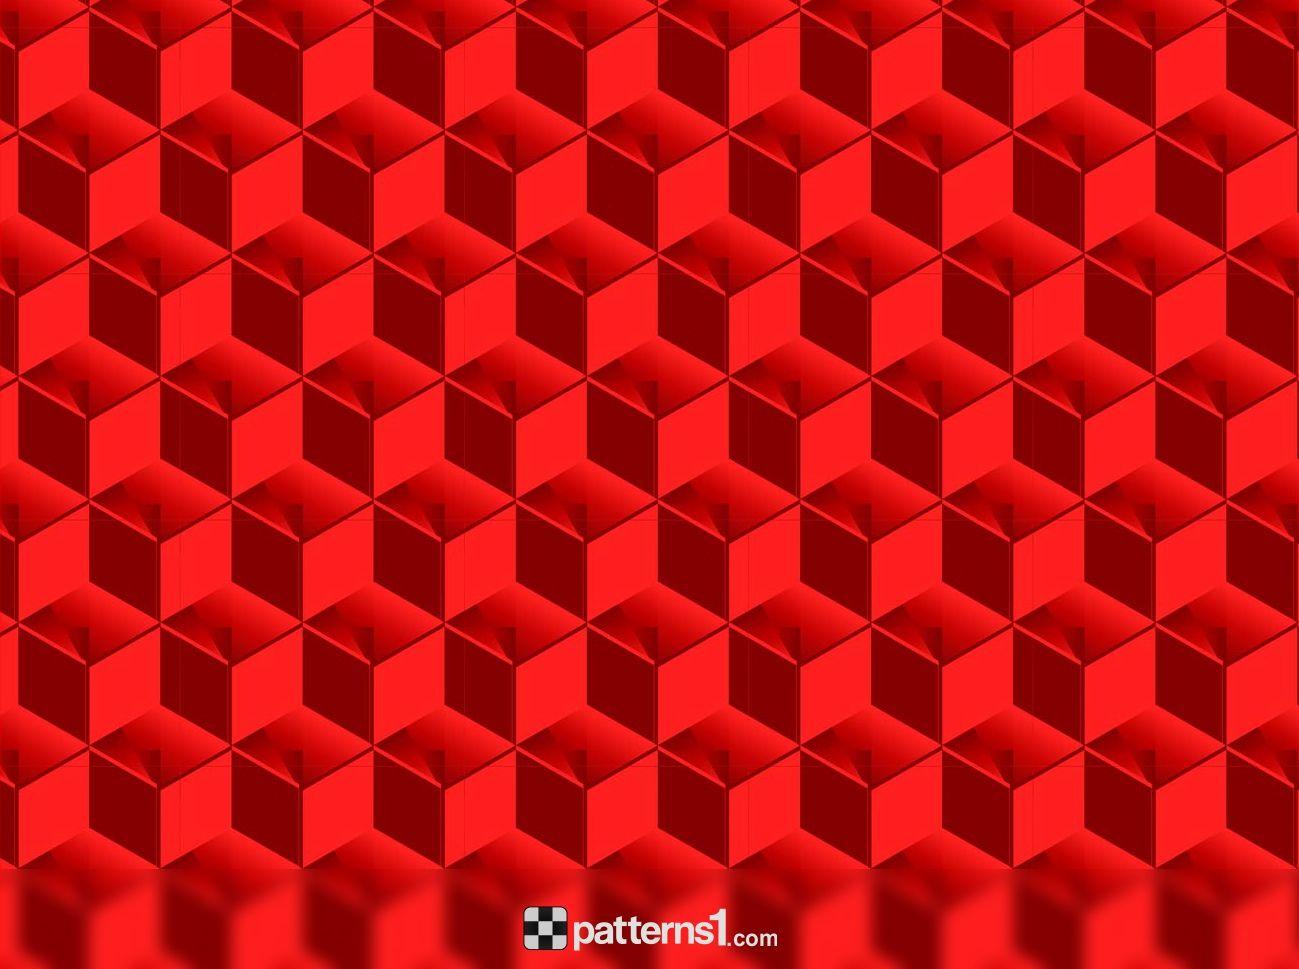 Abstract Red Cubes Patterns Background. Vector Pattern Design